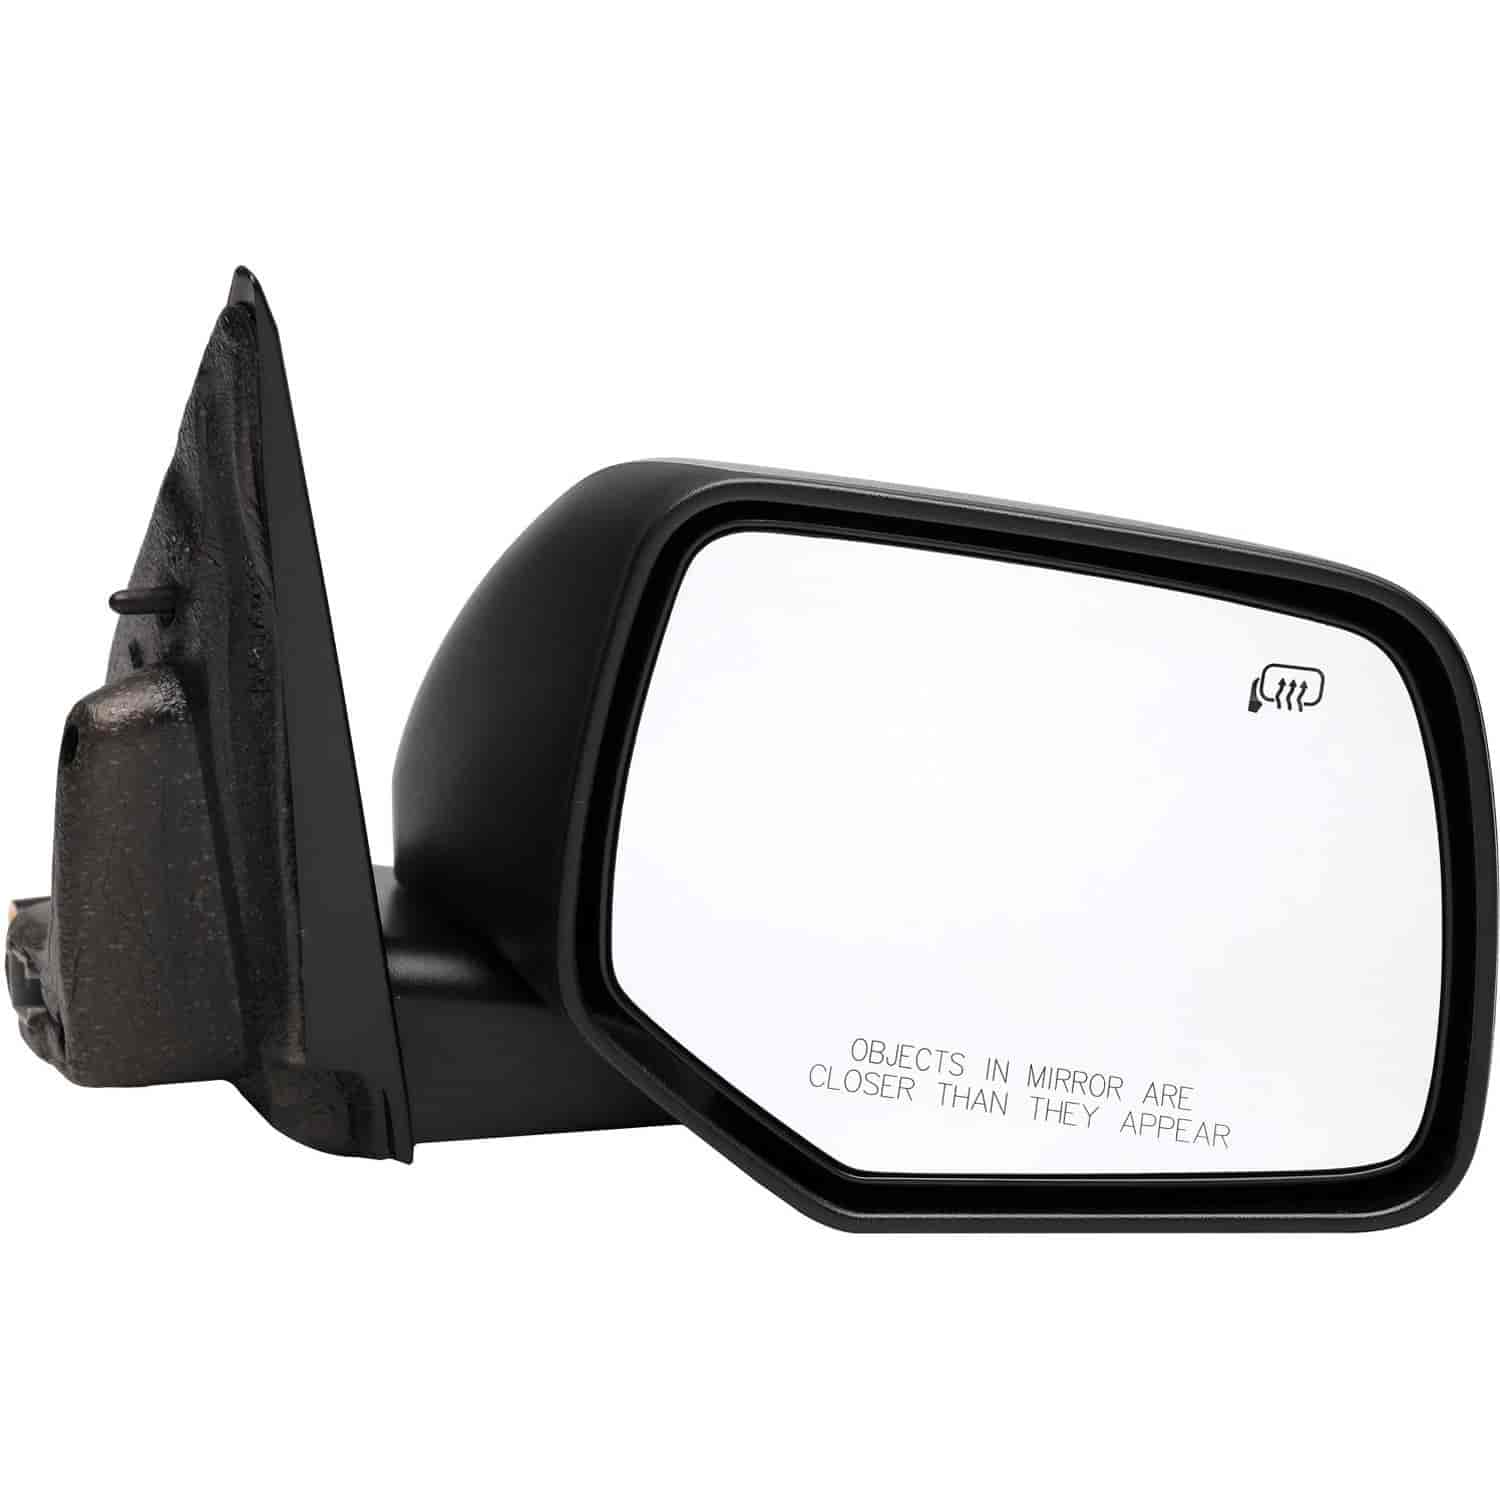 Side View Mirror - Right Side